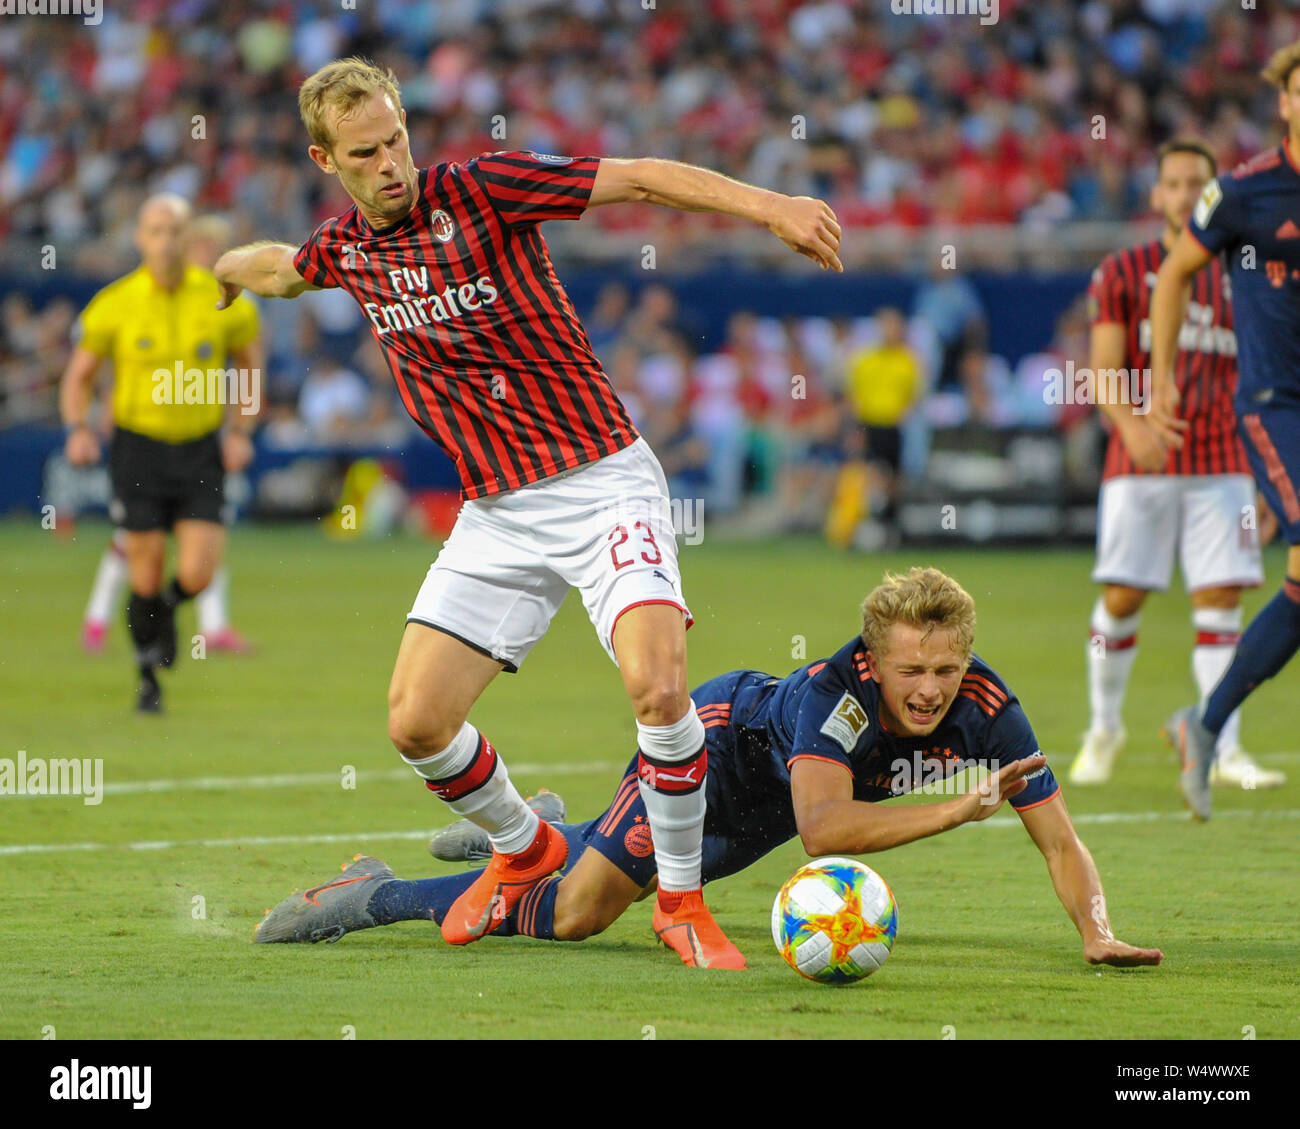 Kansas City, KS, USA. 23rd July, 2019. AC Milan defender, Ivan Strinic (23), and Bayern forward, Fiete Arp (15), clash while working for ball control during the 2019 International Champions Cup match between AC Milan and FC Bayern, at Children's Mercy Park in Kansas City, KS. Bayern defeated AC Milan, 1-0. Kevin Langley/Sports South Media/CSM/Alamy Live News Stock Photo